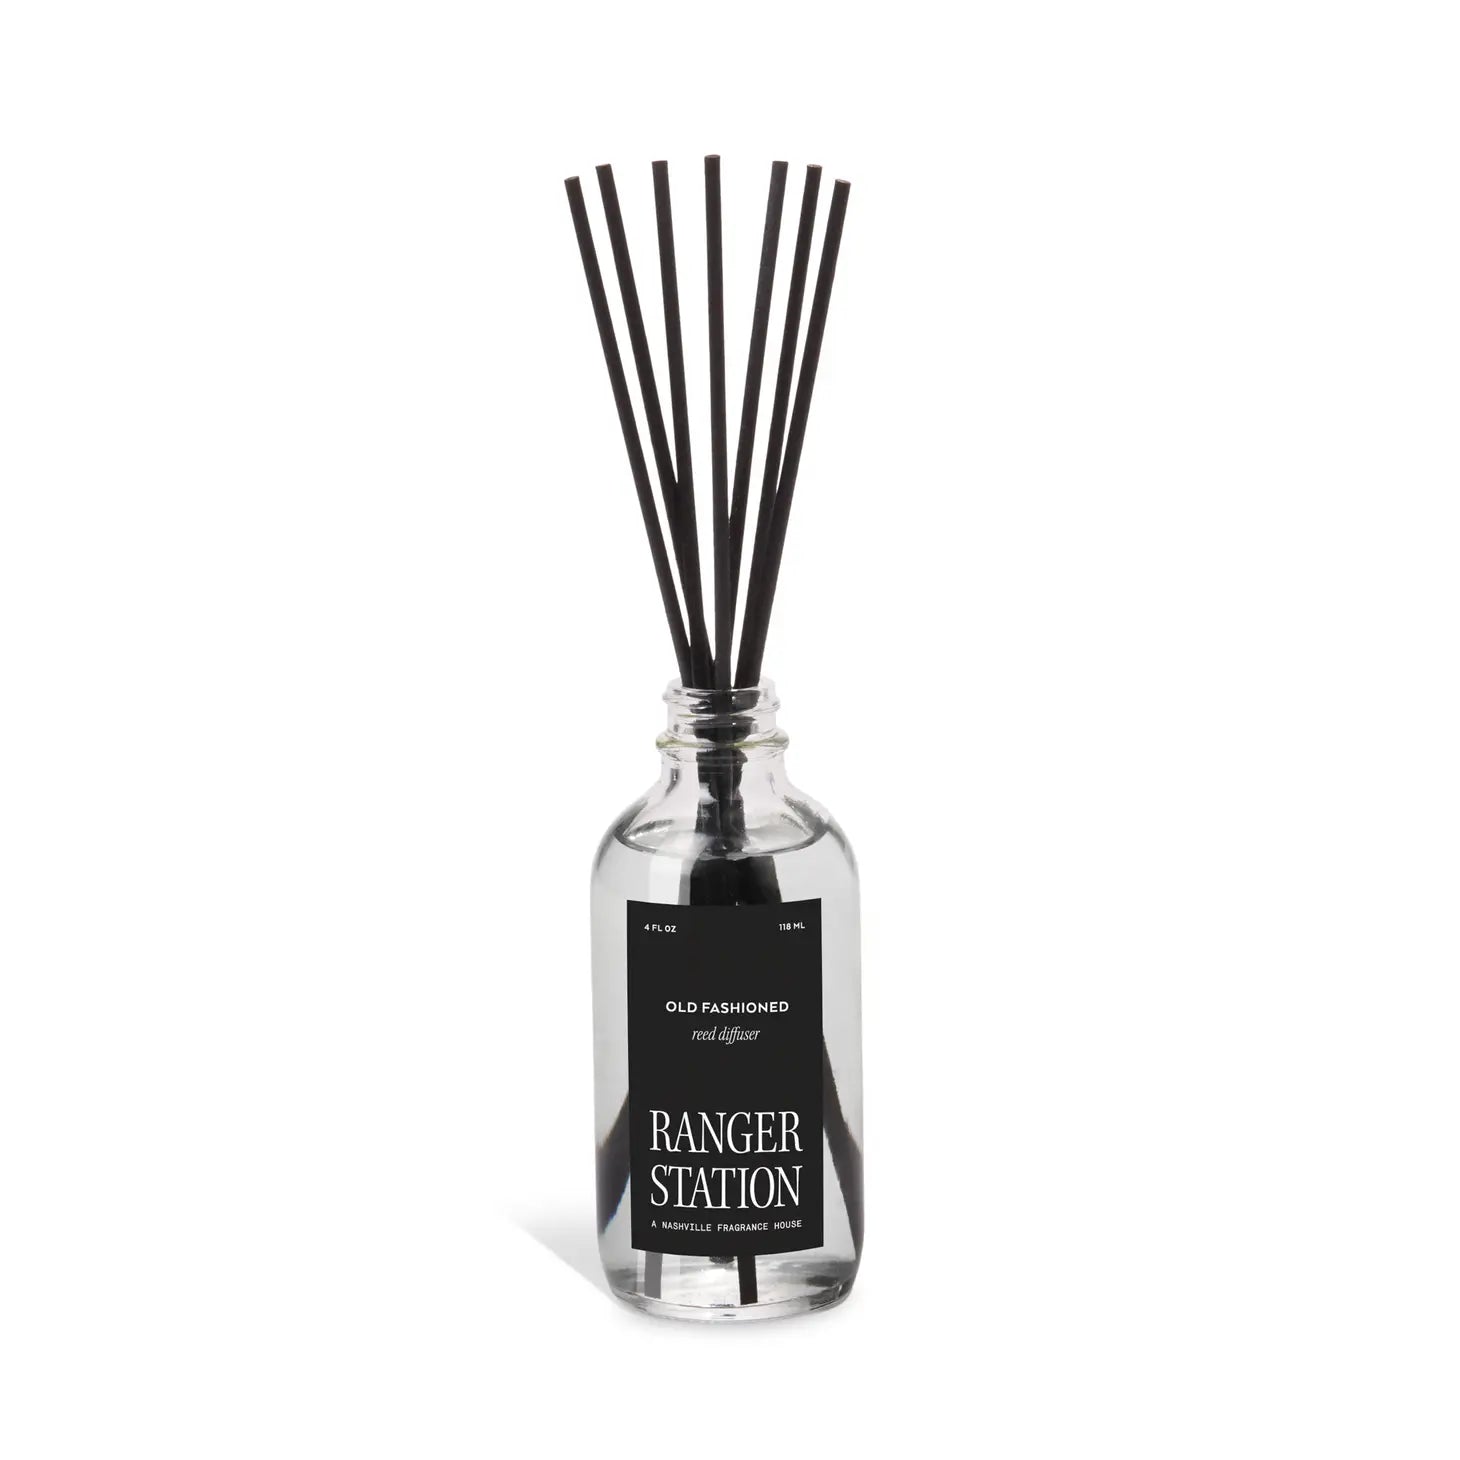 Old Fashioned Reed Diffuser by Ranger Station